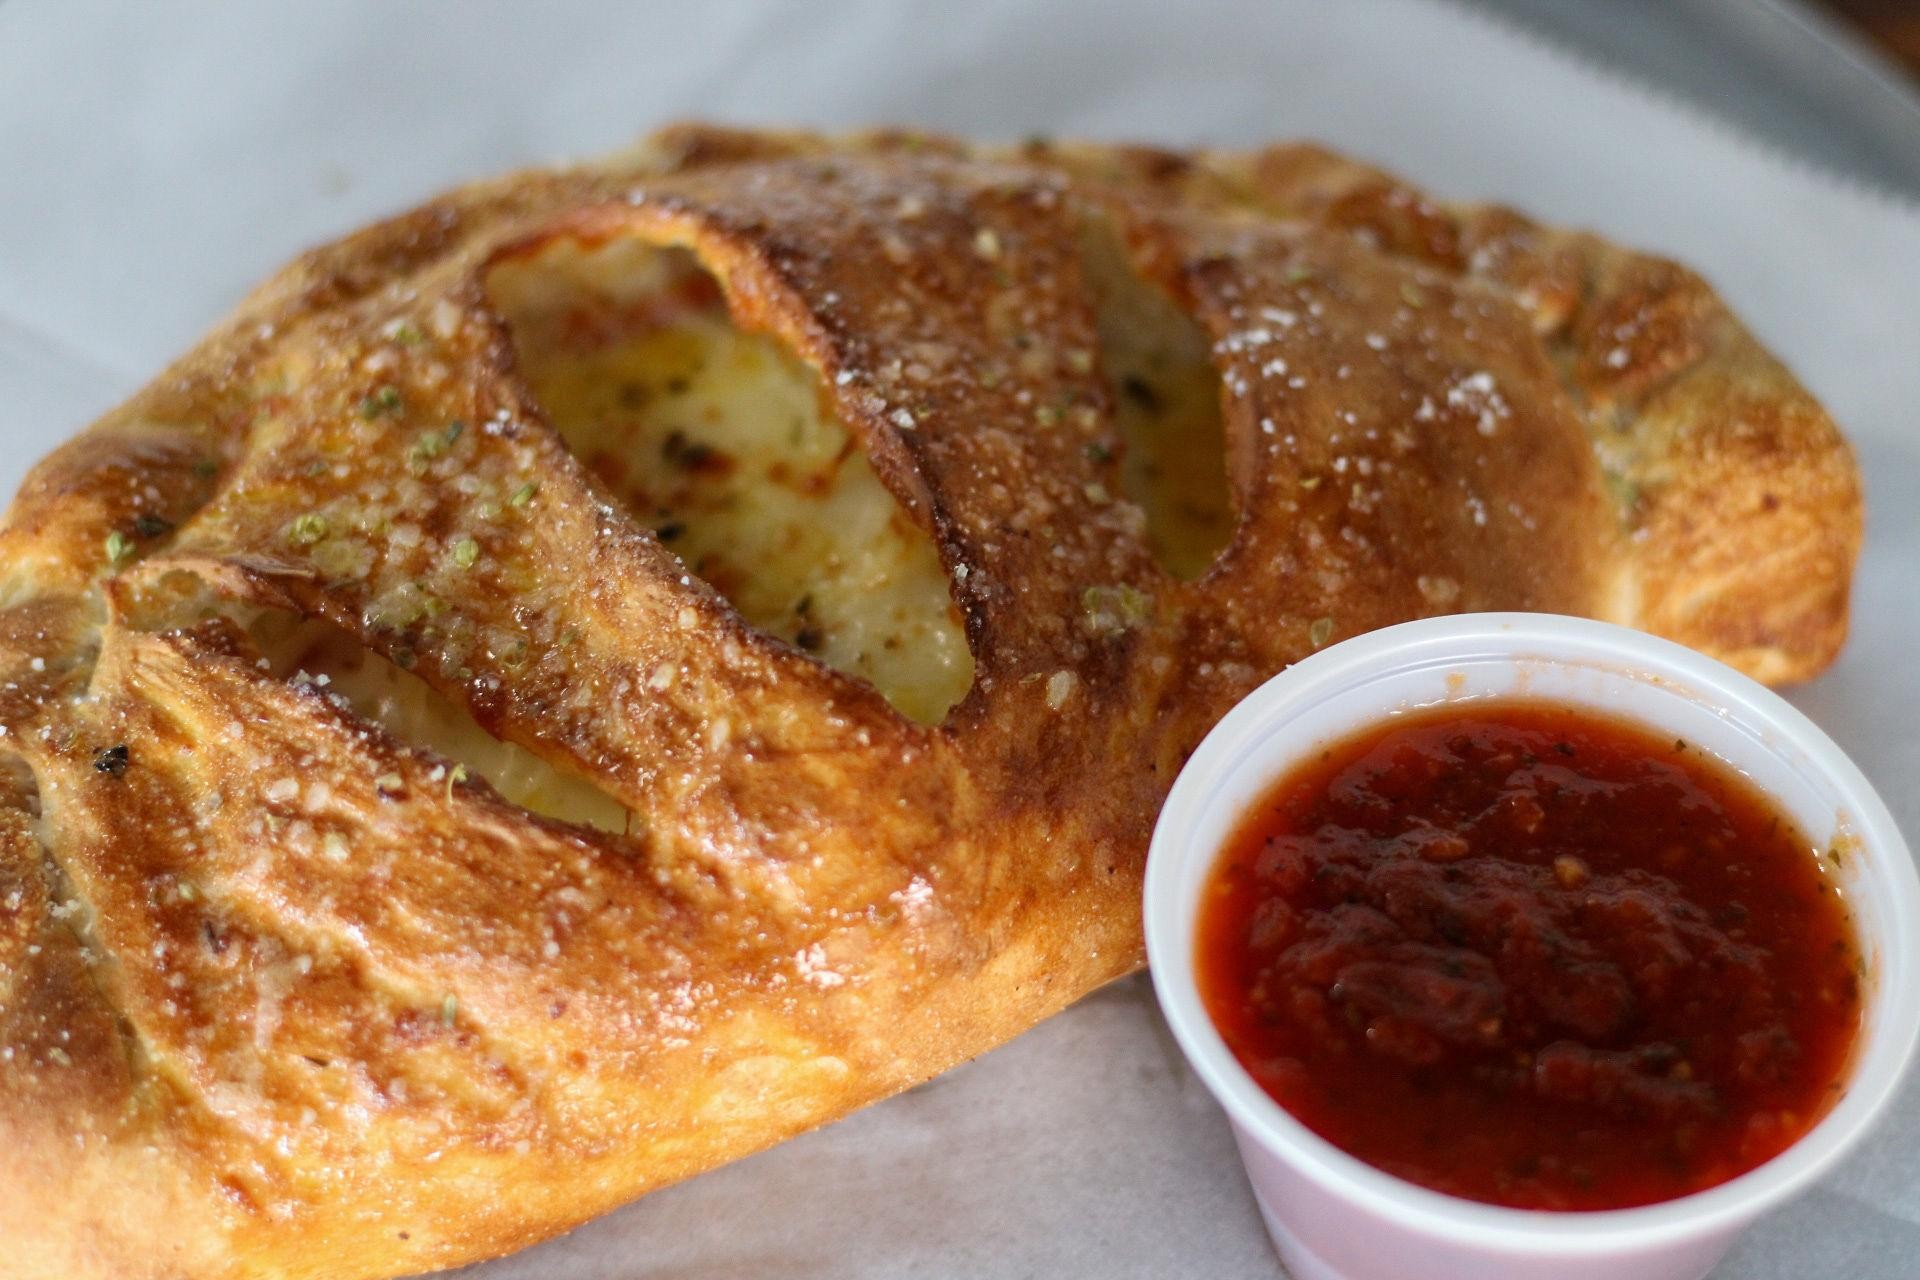 PJ's Philly Calzone